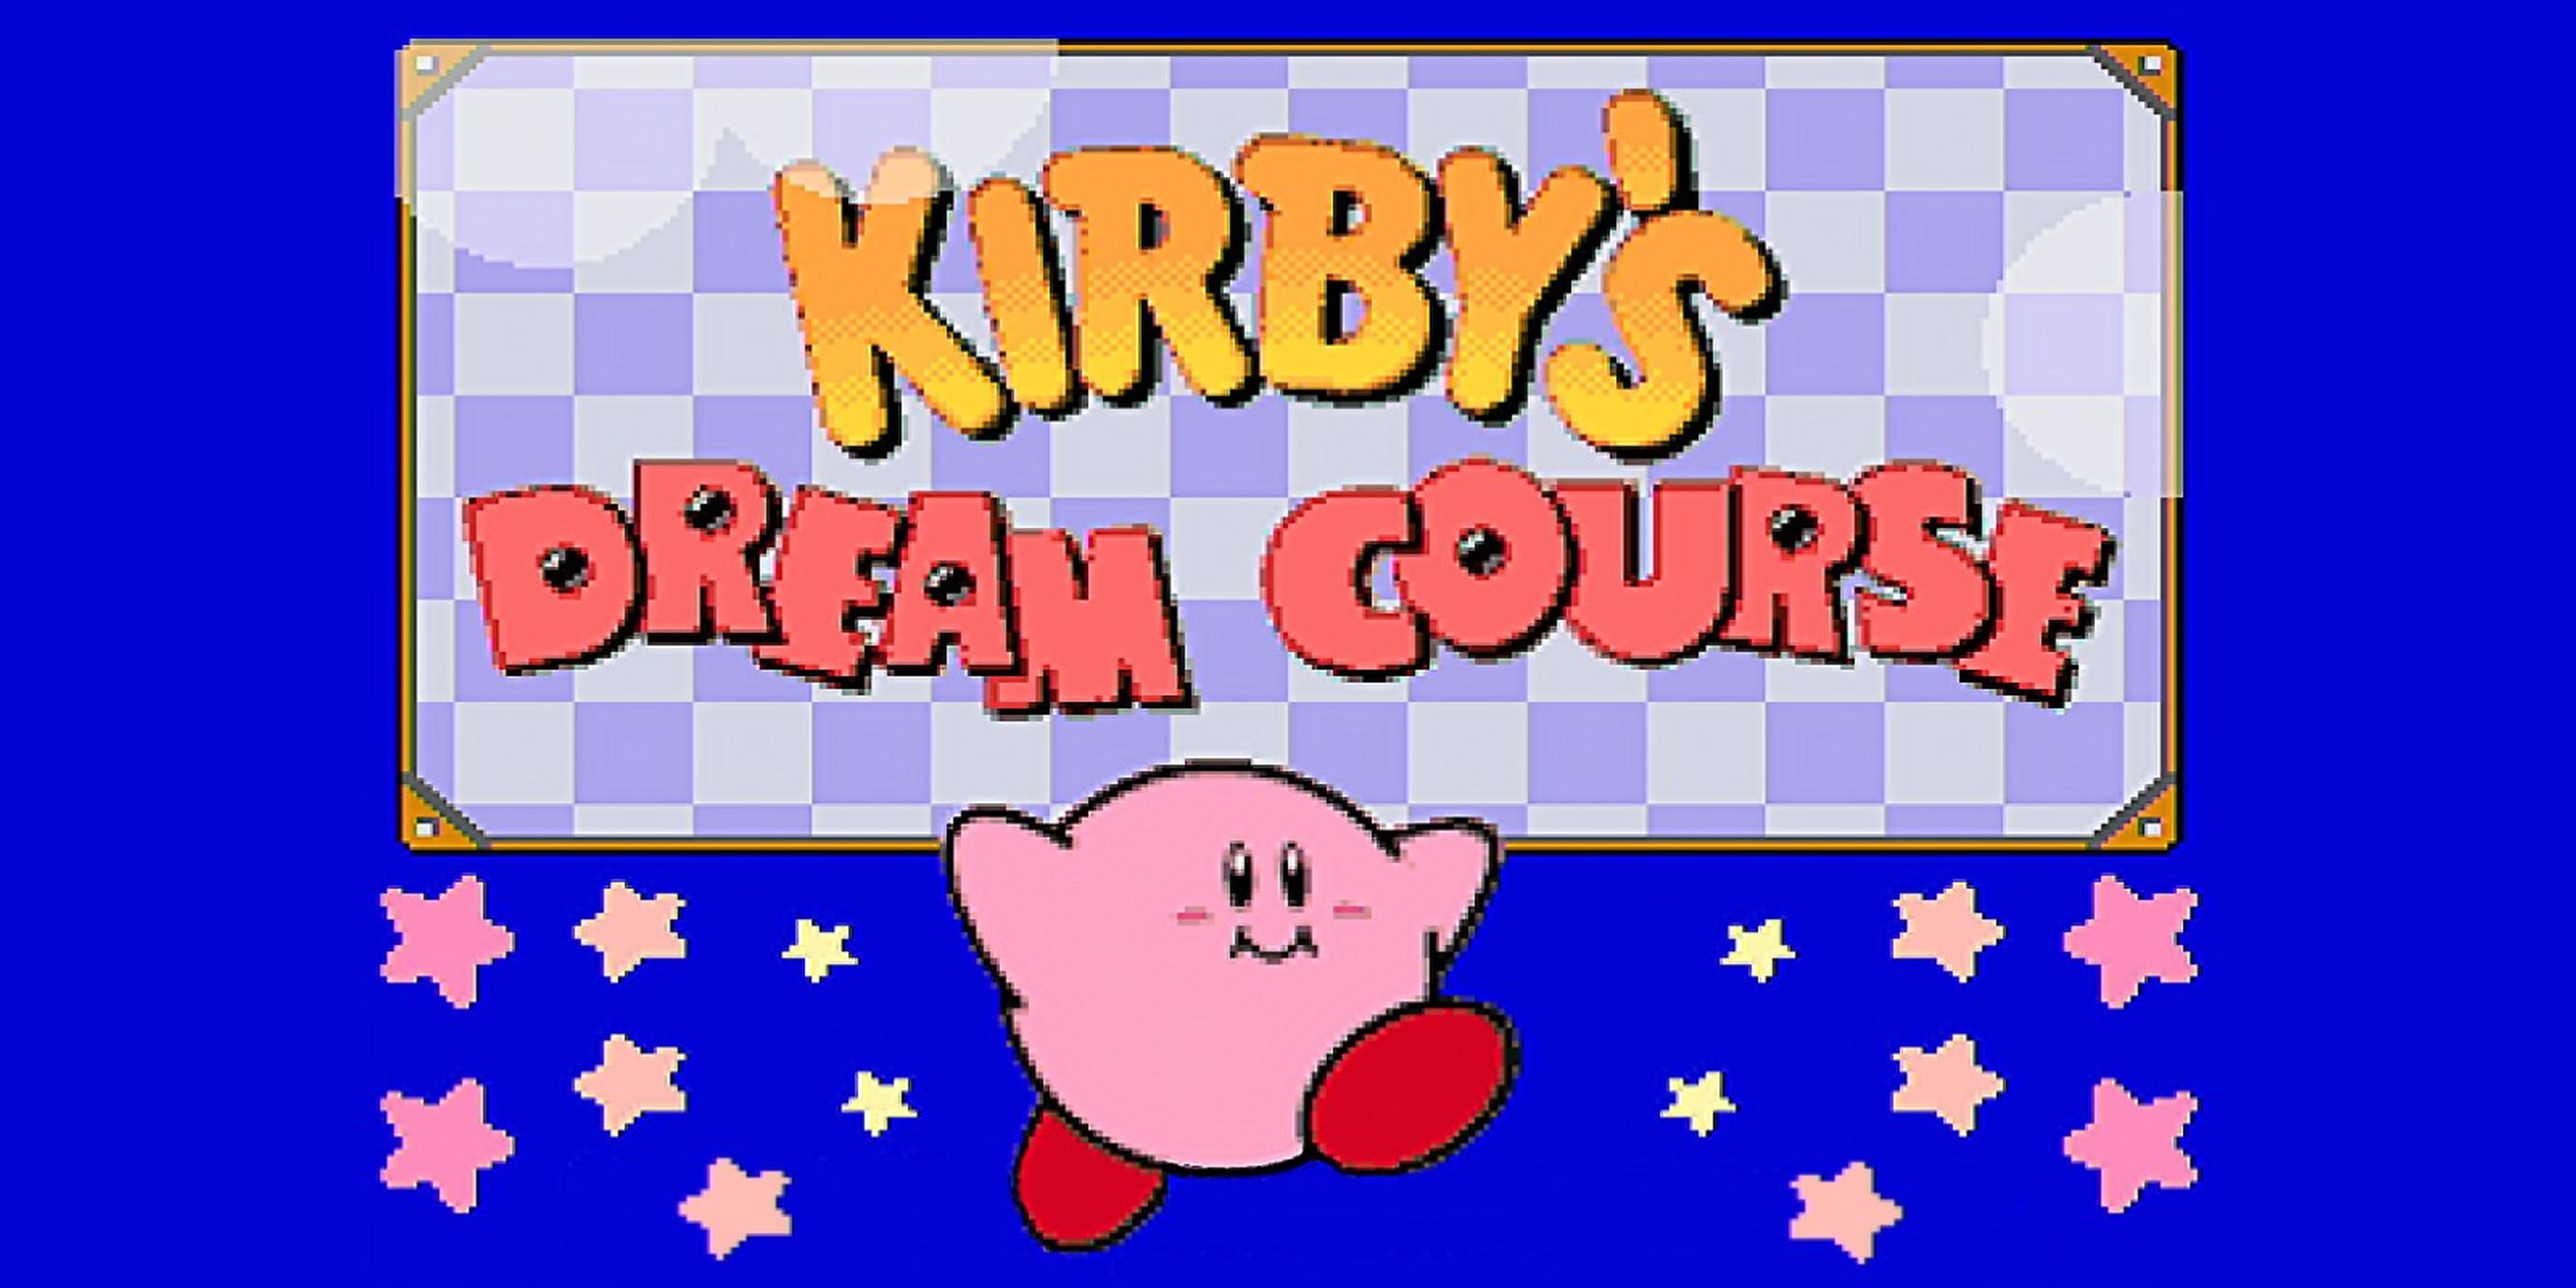 Kirby Dream Course